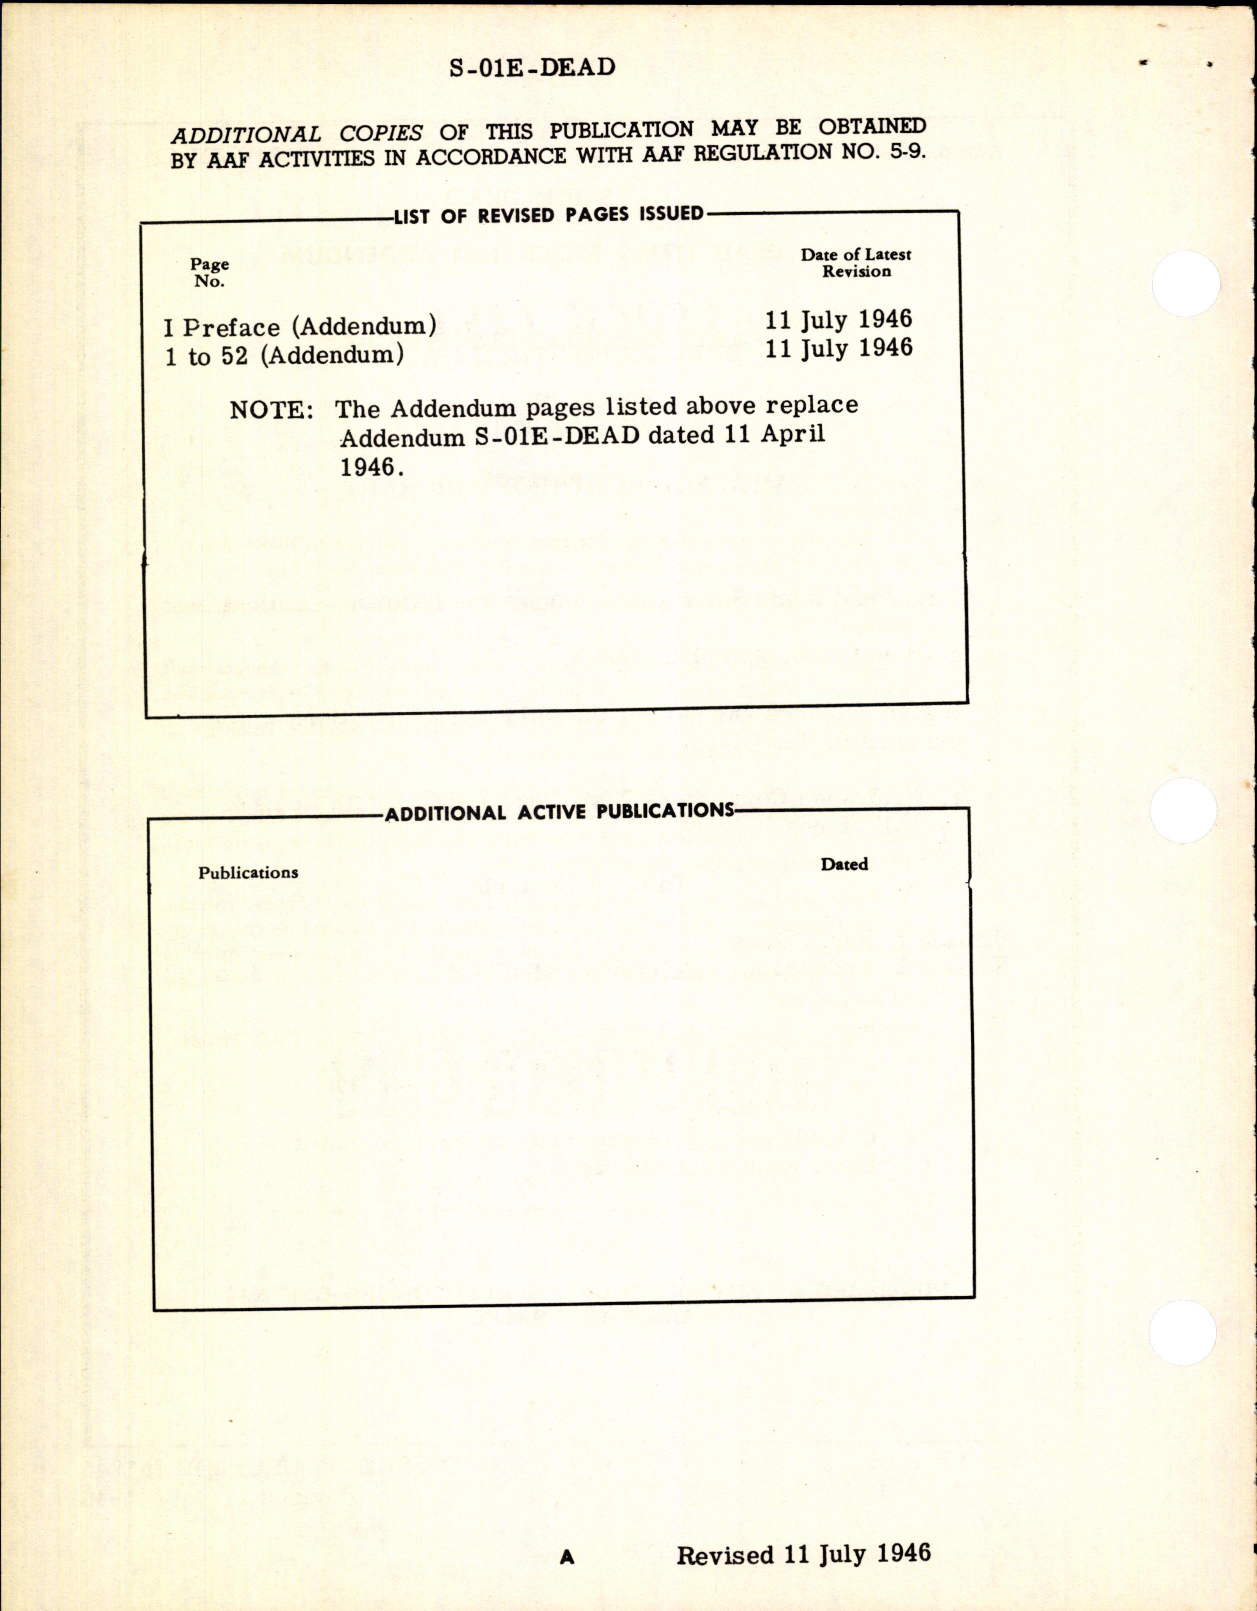 Sample page 2 from AirCorps Library document: Dead Items Stock List for Northrop Aircraft